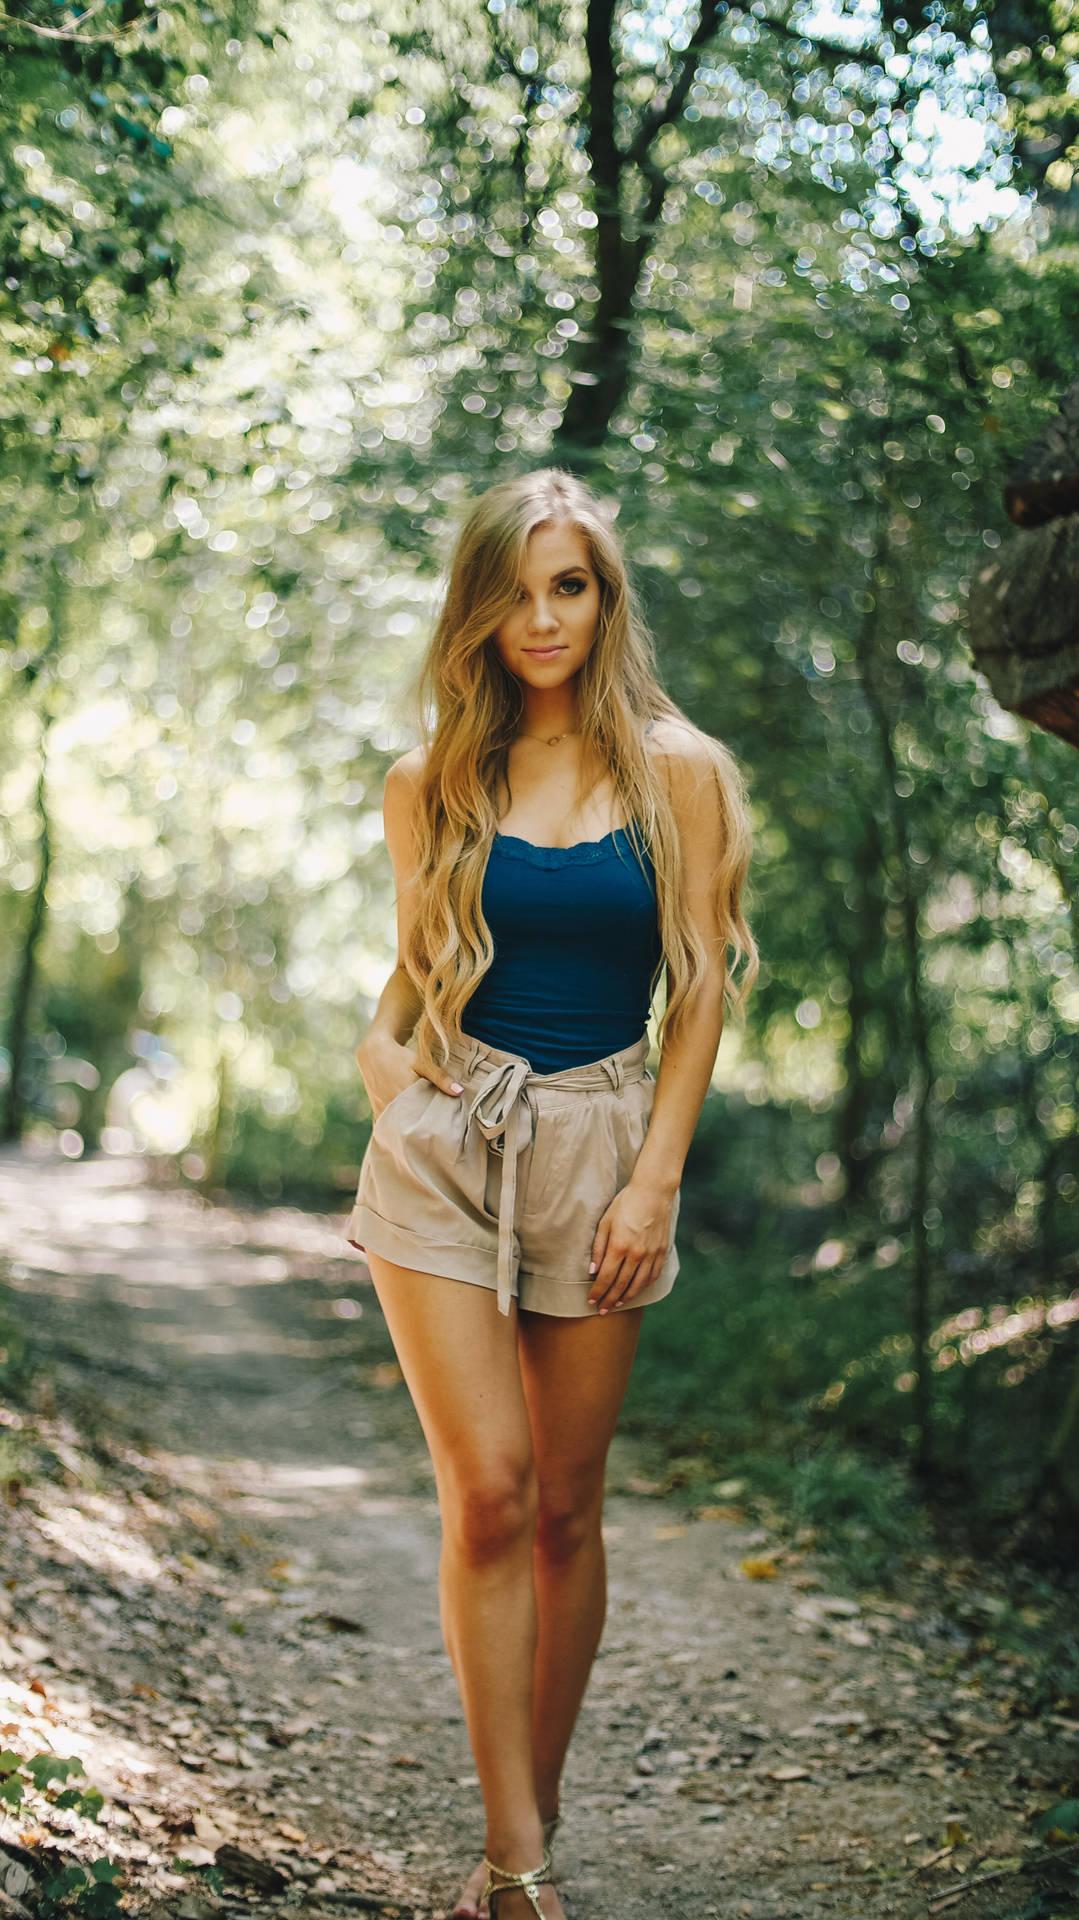 Very Pretty Girl And A Forest Trail Wallpaper